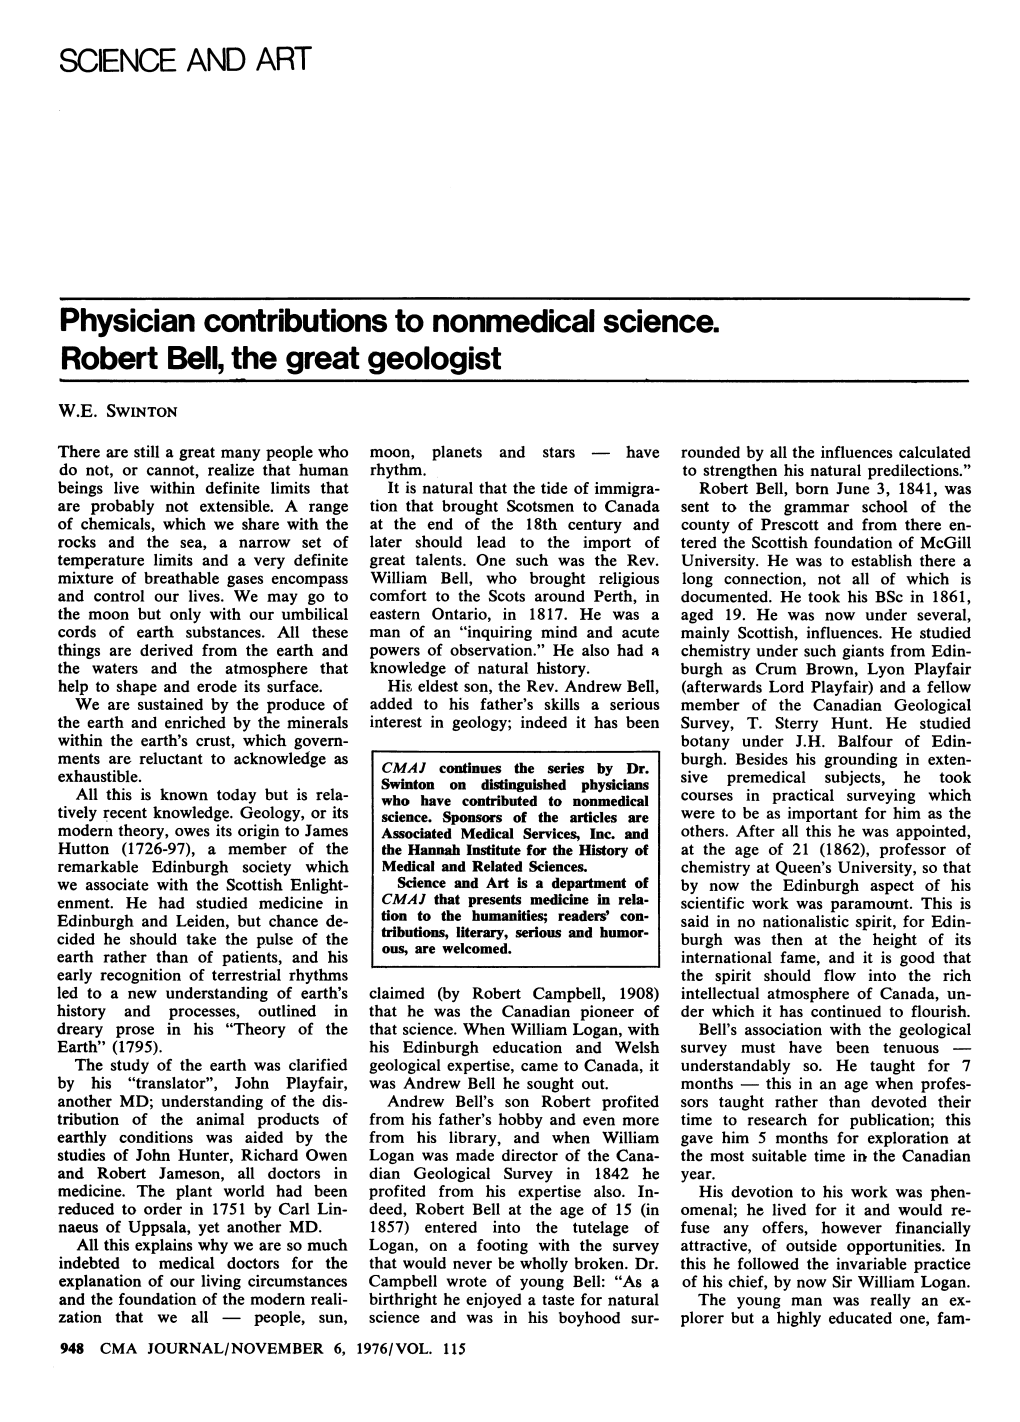 Physician Contributions to Nonmedical Science. Robert Bell, the Great Geologist